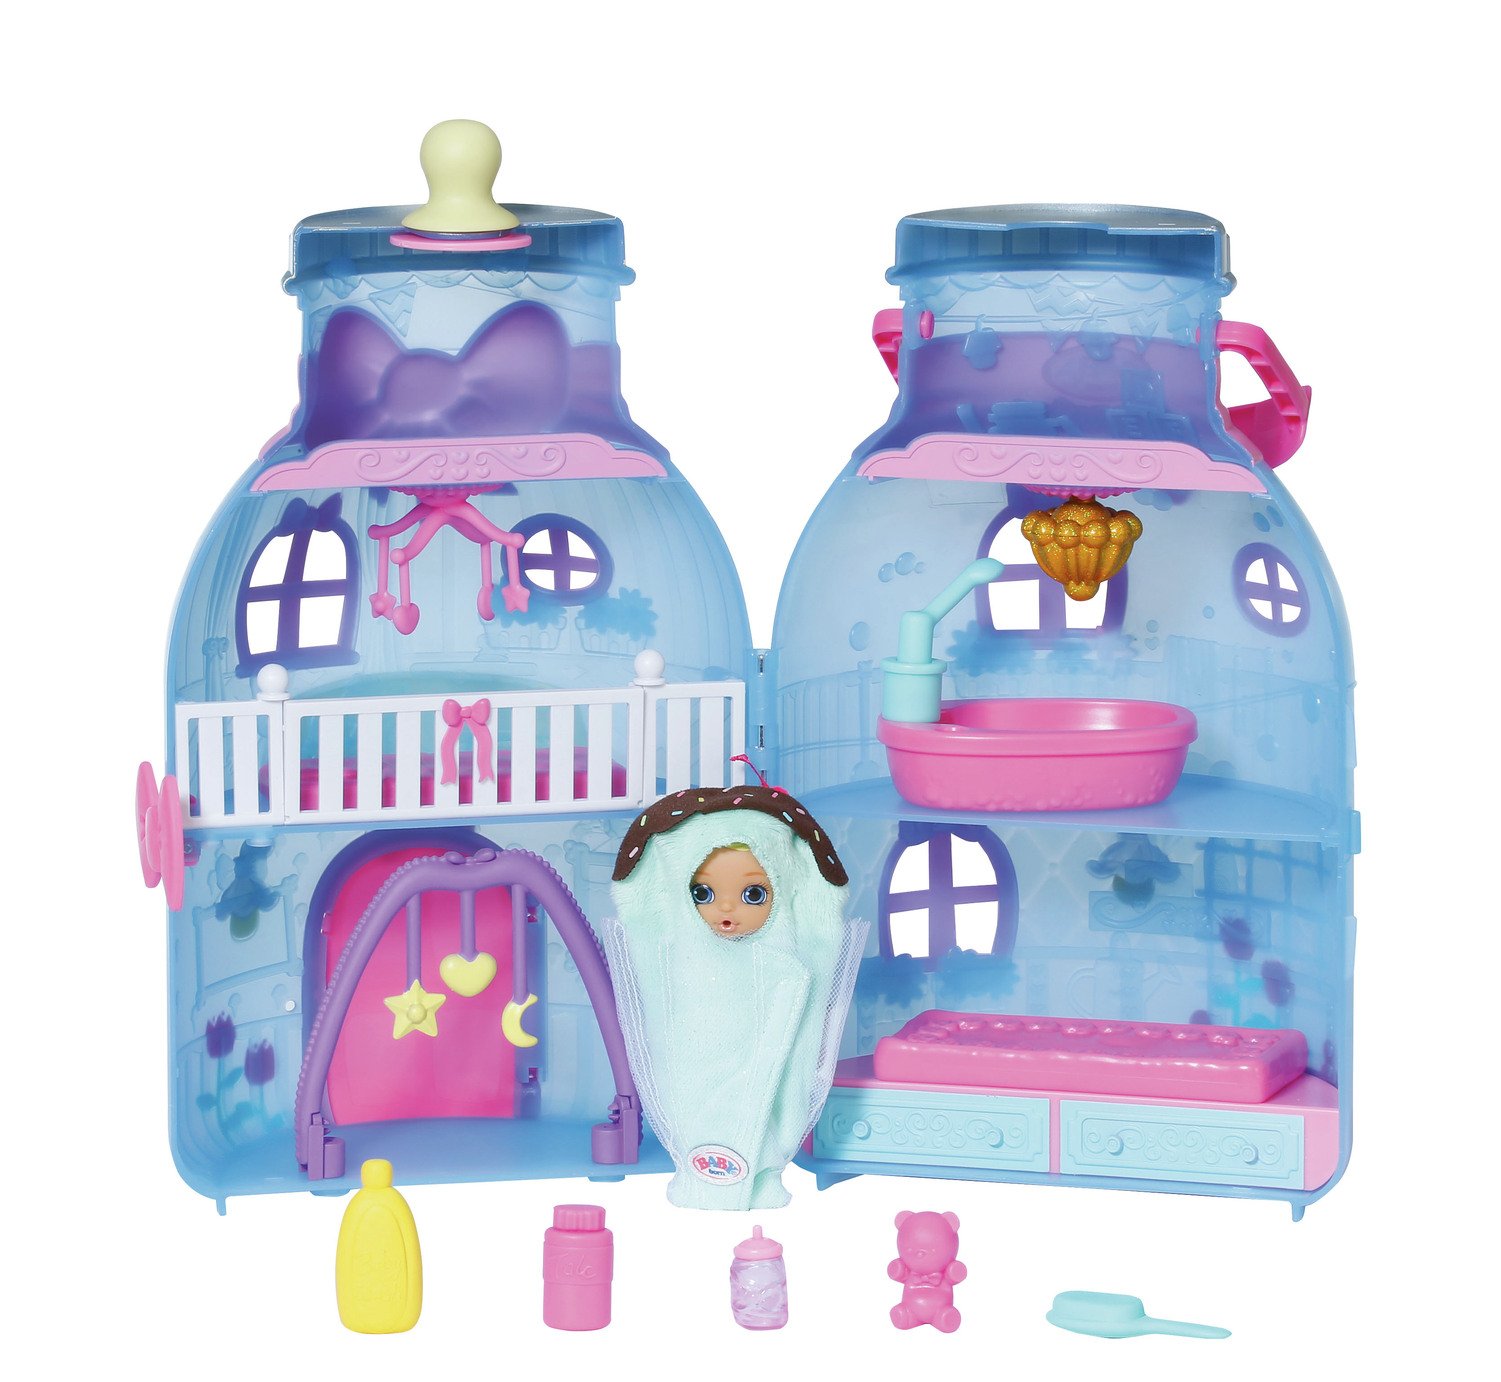 BABY born Surprise Baby Bottle House Review